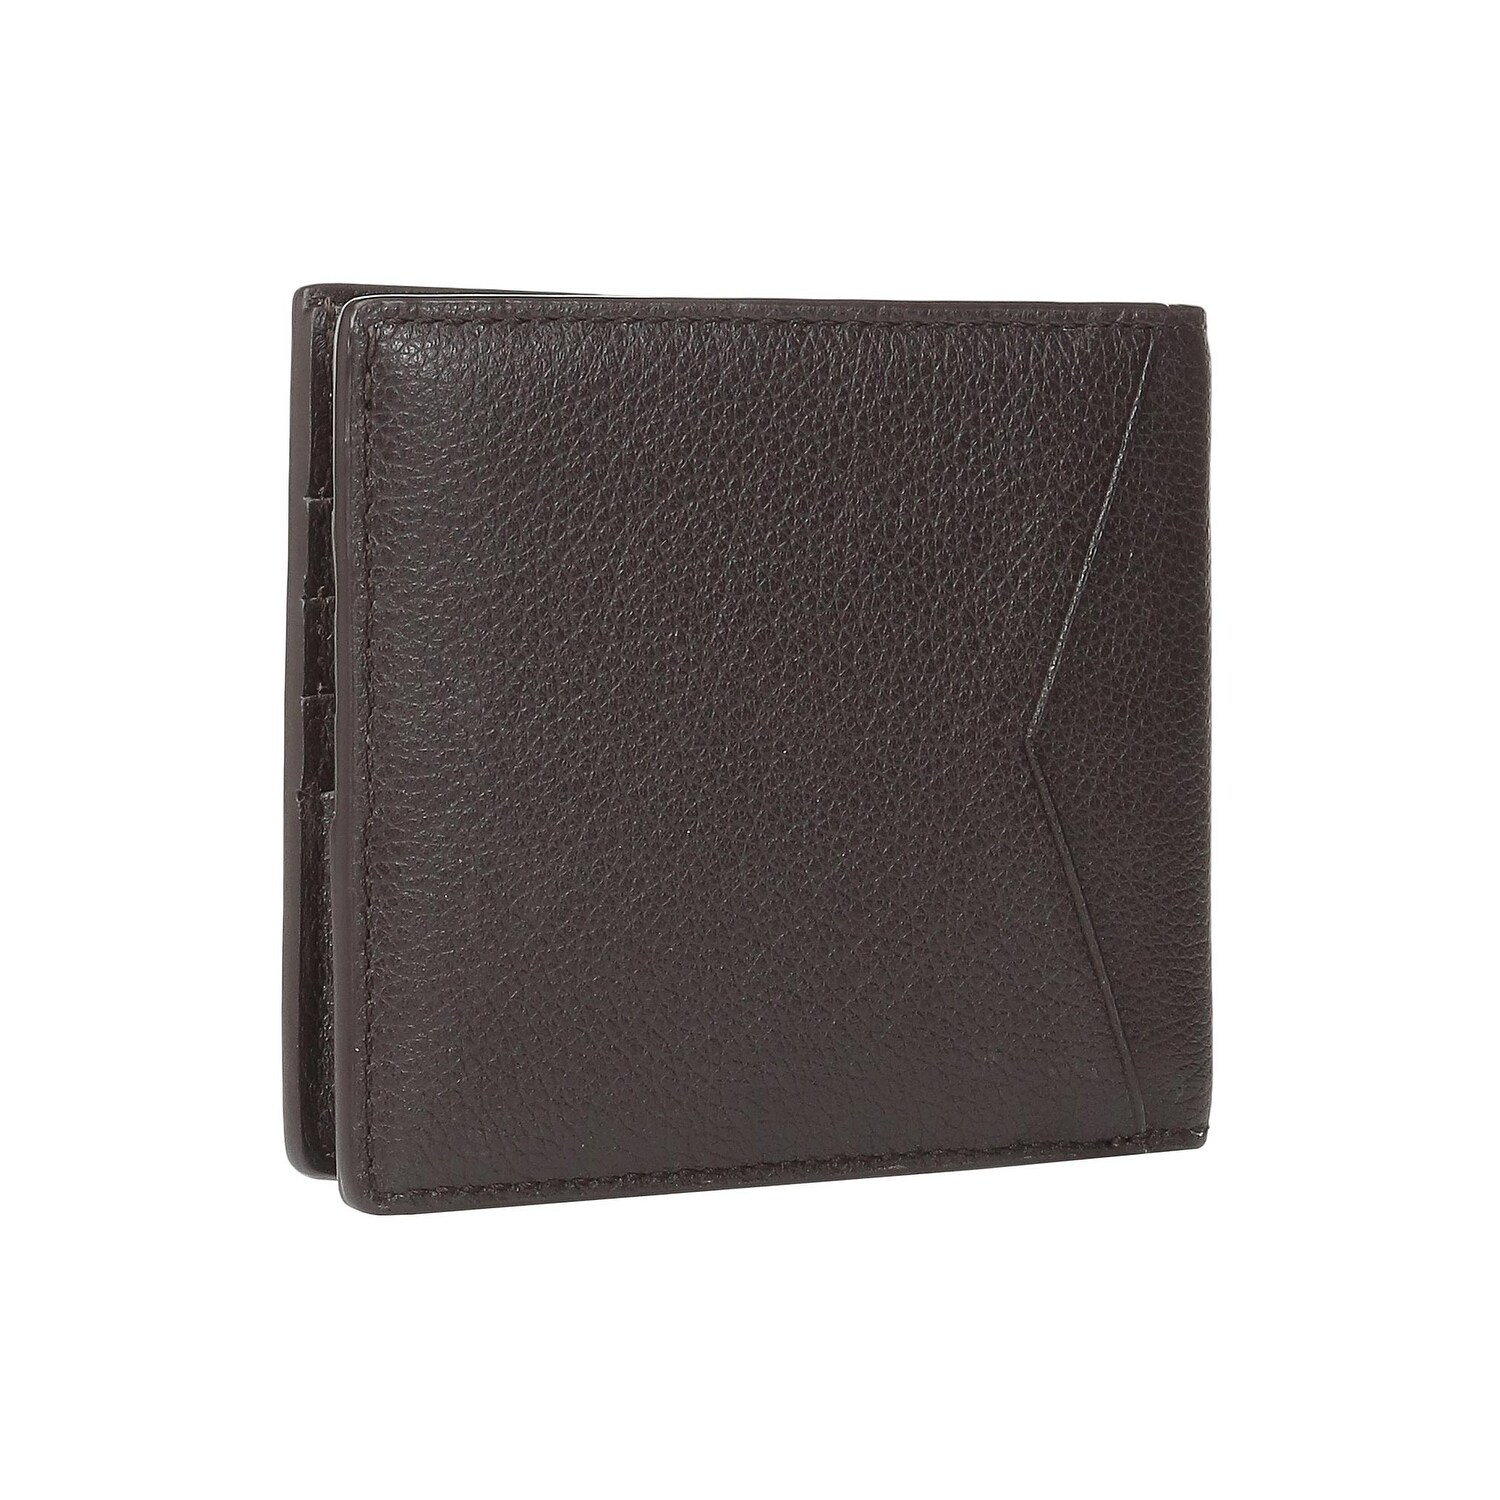 Michael Kors Mens Caballo Leather Rfid Billfold Wallet Brown - New In - Overstock - 30720782